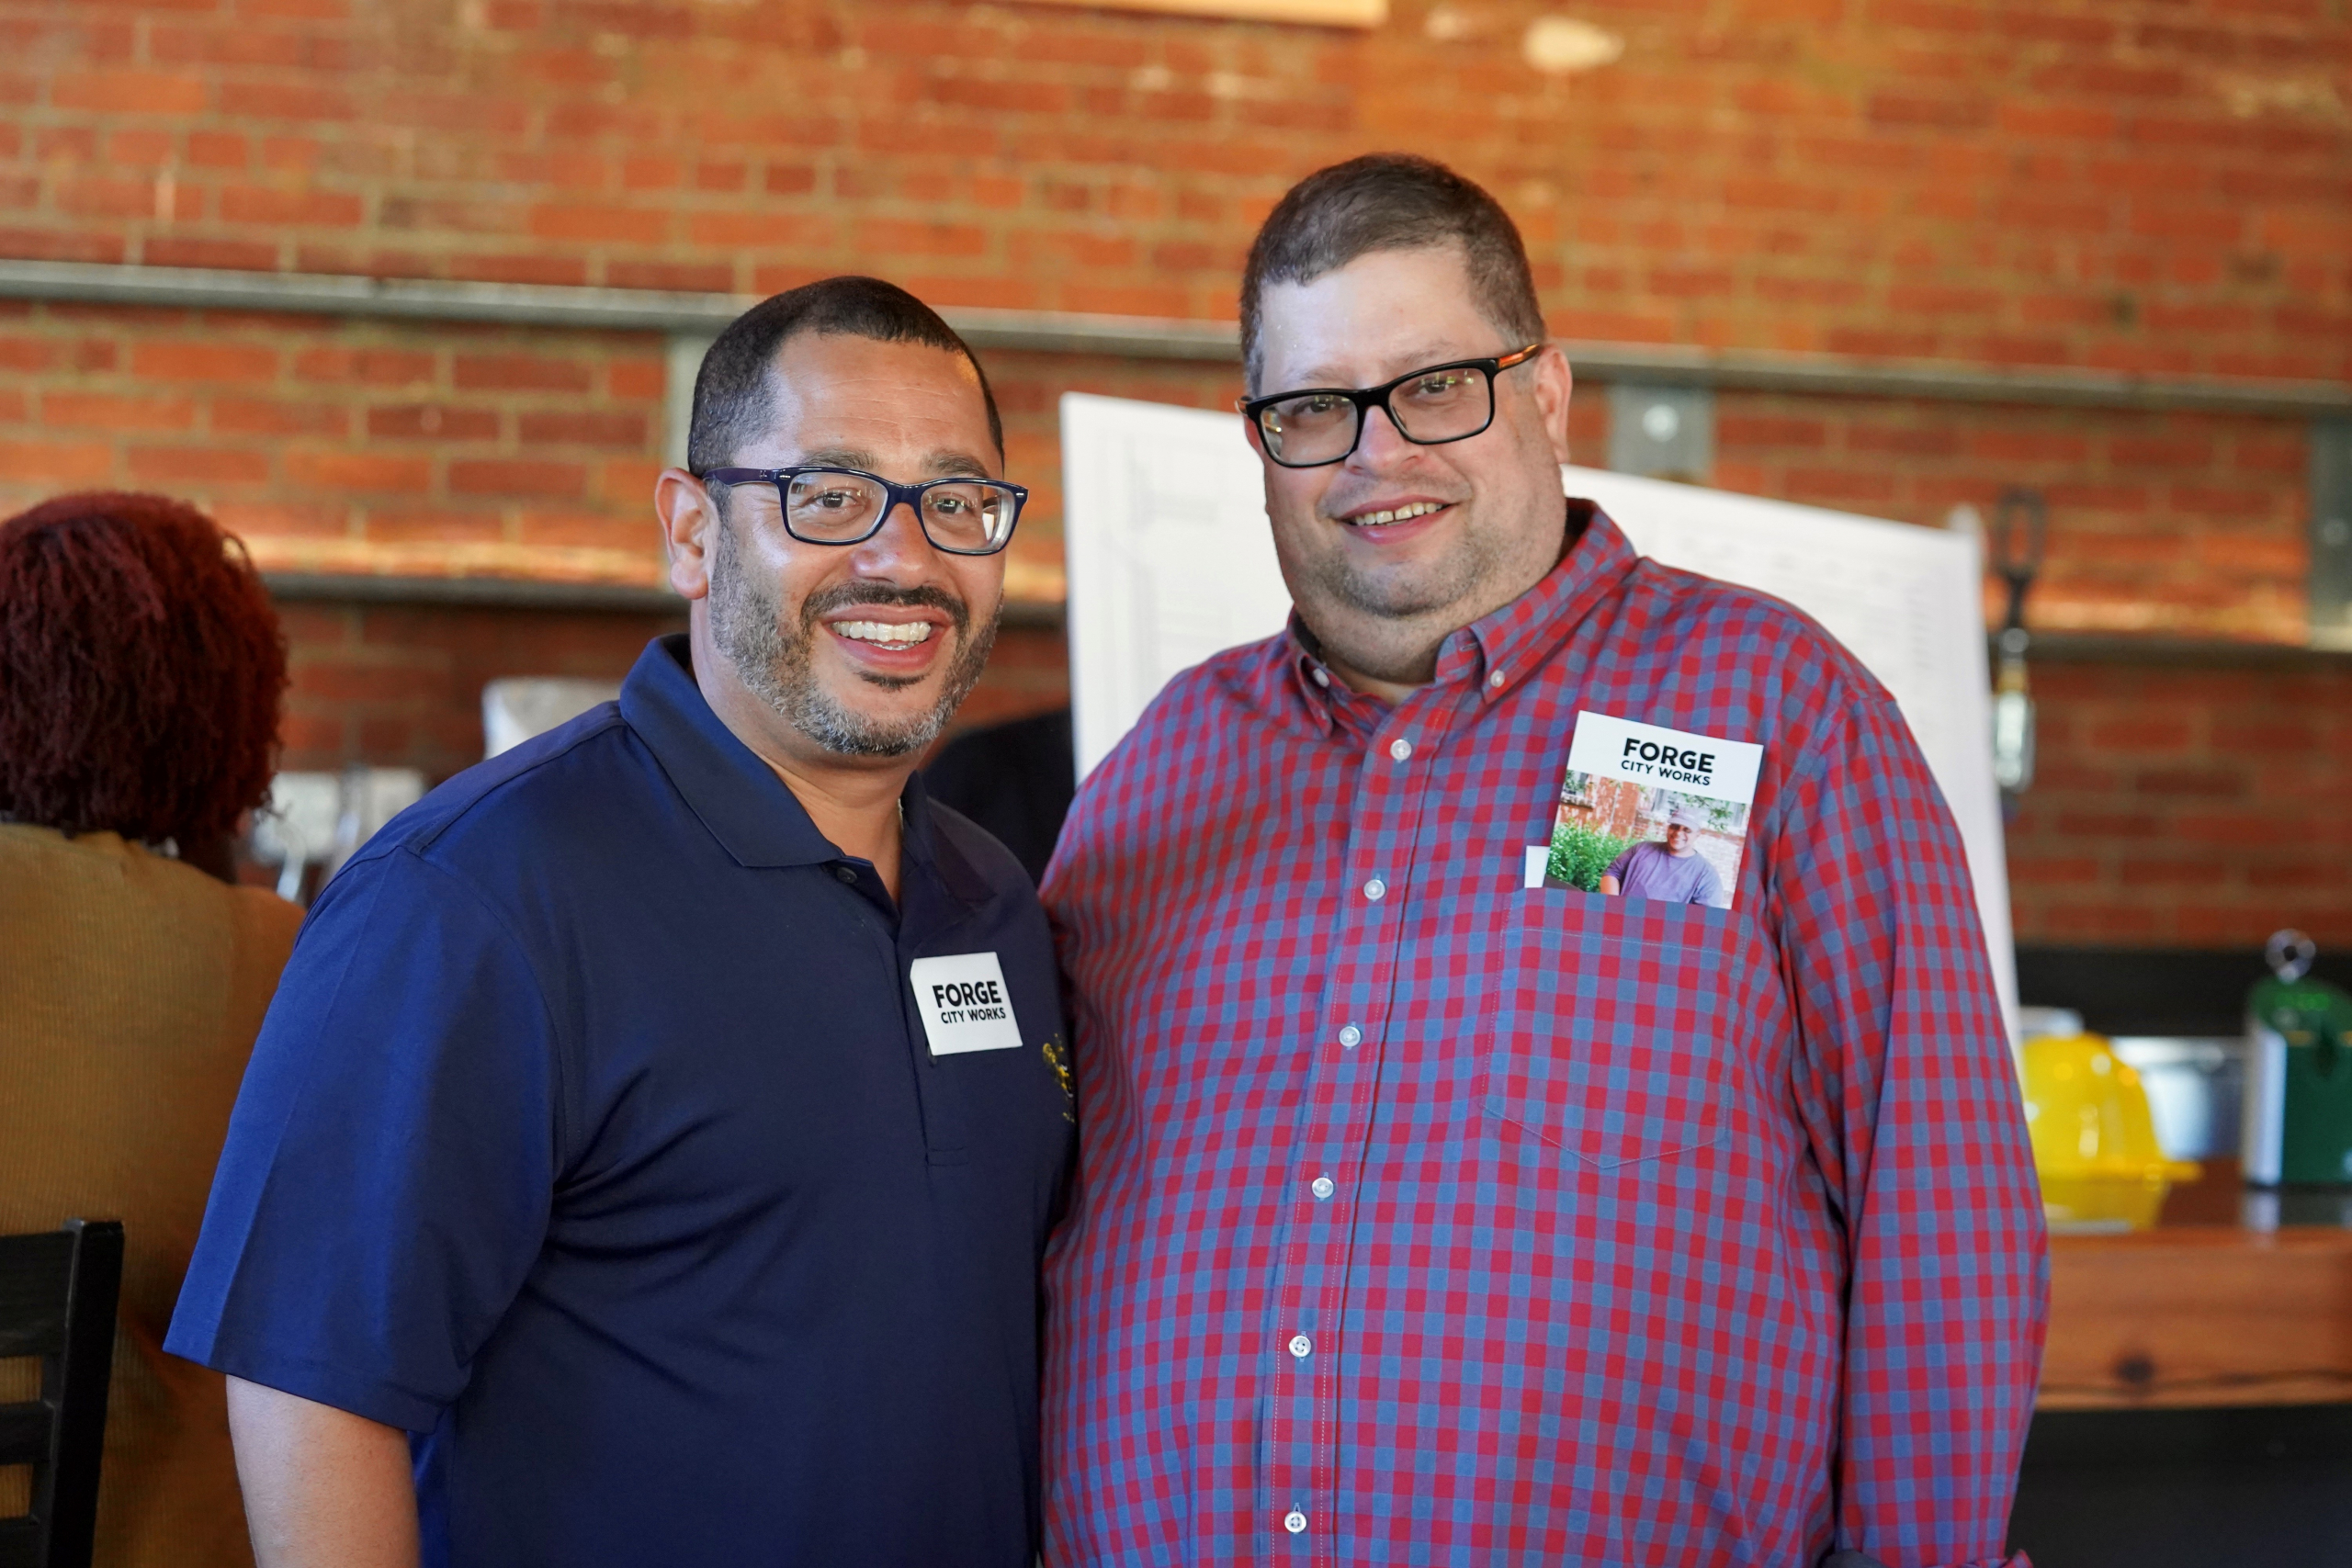 Jason Rojas and Ben Dubow, Forge City Works executive director. Photo by Molly Shanahan, Watermark Inc.